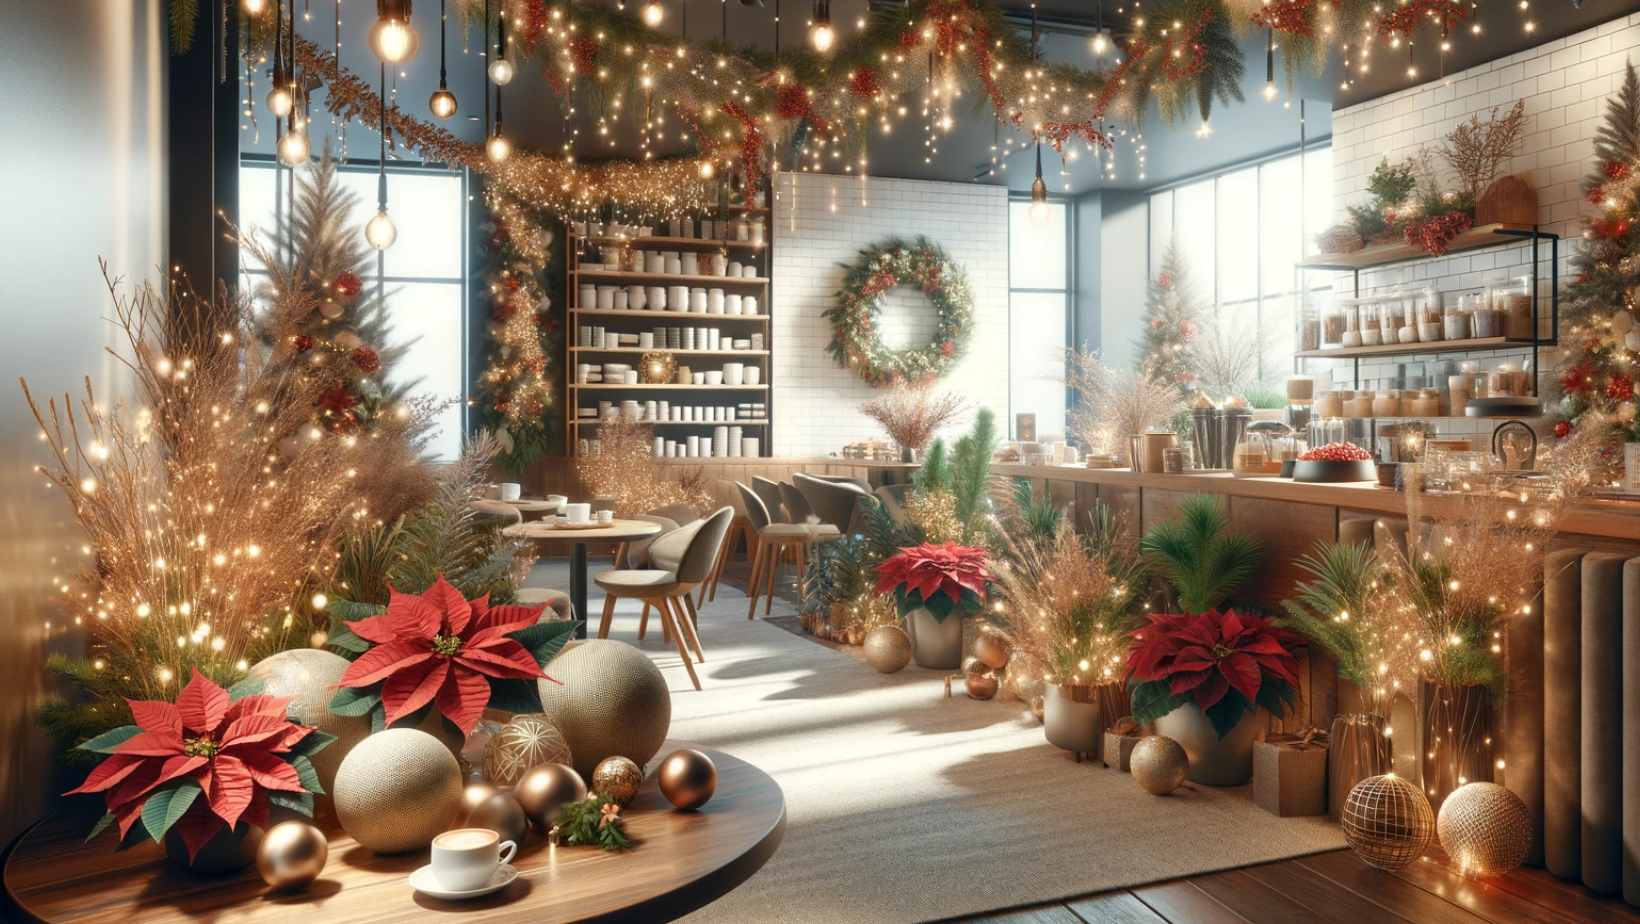 realistic image showcasing an elegantly decorated holiday-themed business setting